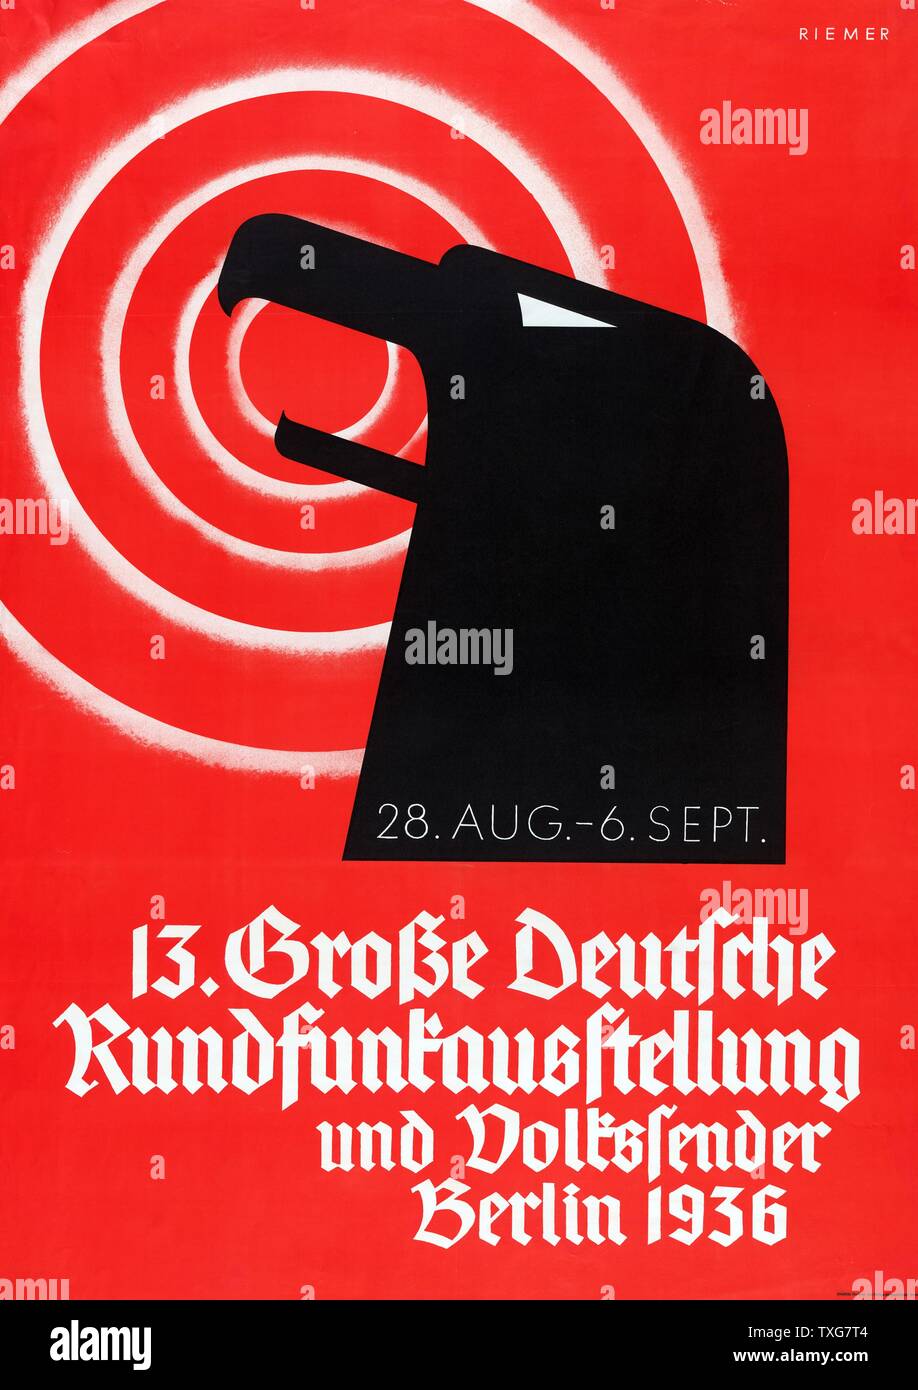 German Poster announcing a radio broadcasting in Berlin August-September 1936 Lithograph Stock Photo